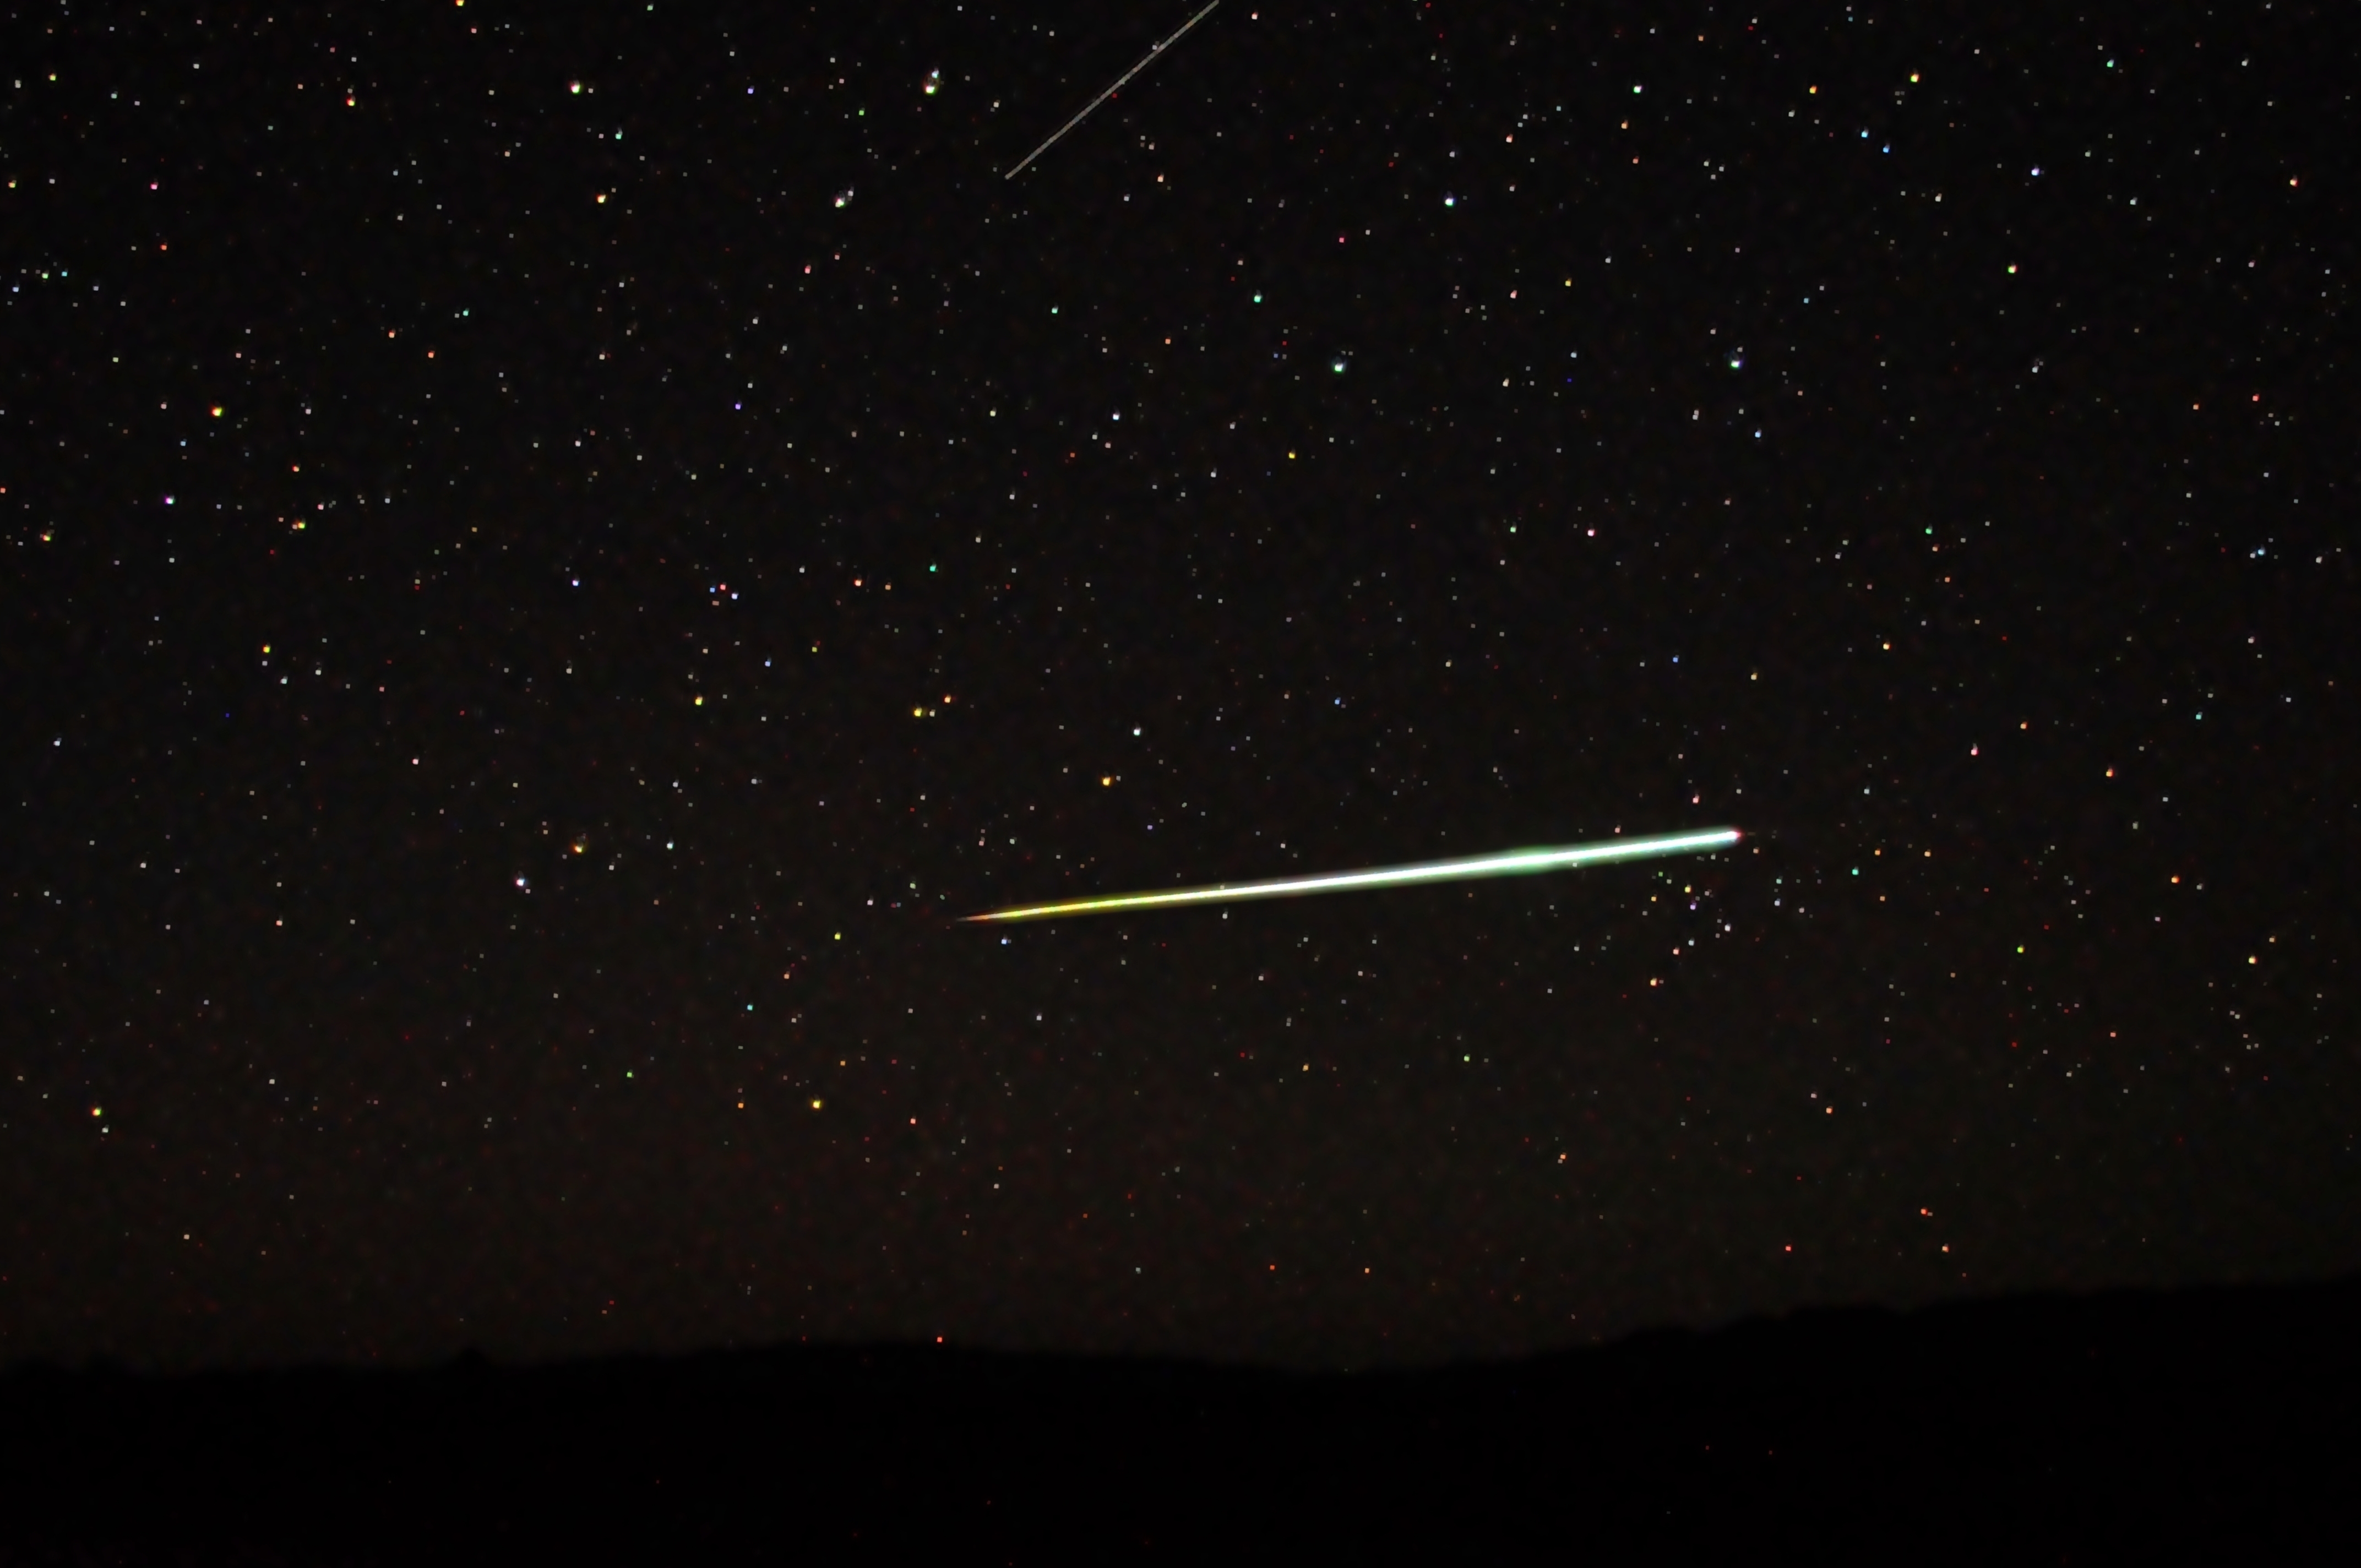 This bolide appeared over the Flinders Ranges, in the South Australian desert on the evening of the 24th April 2011.